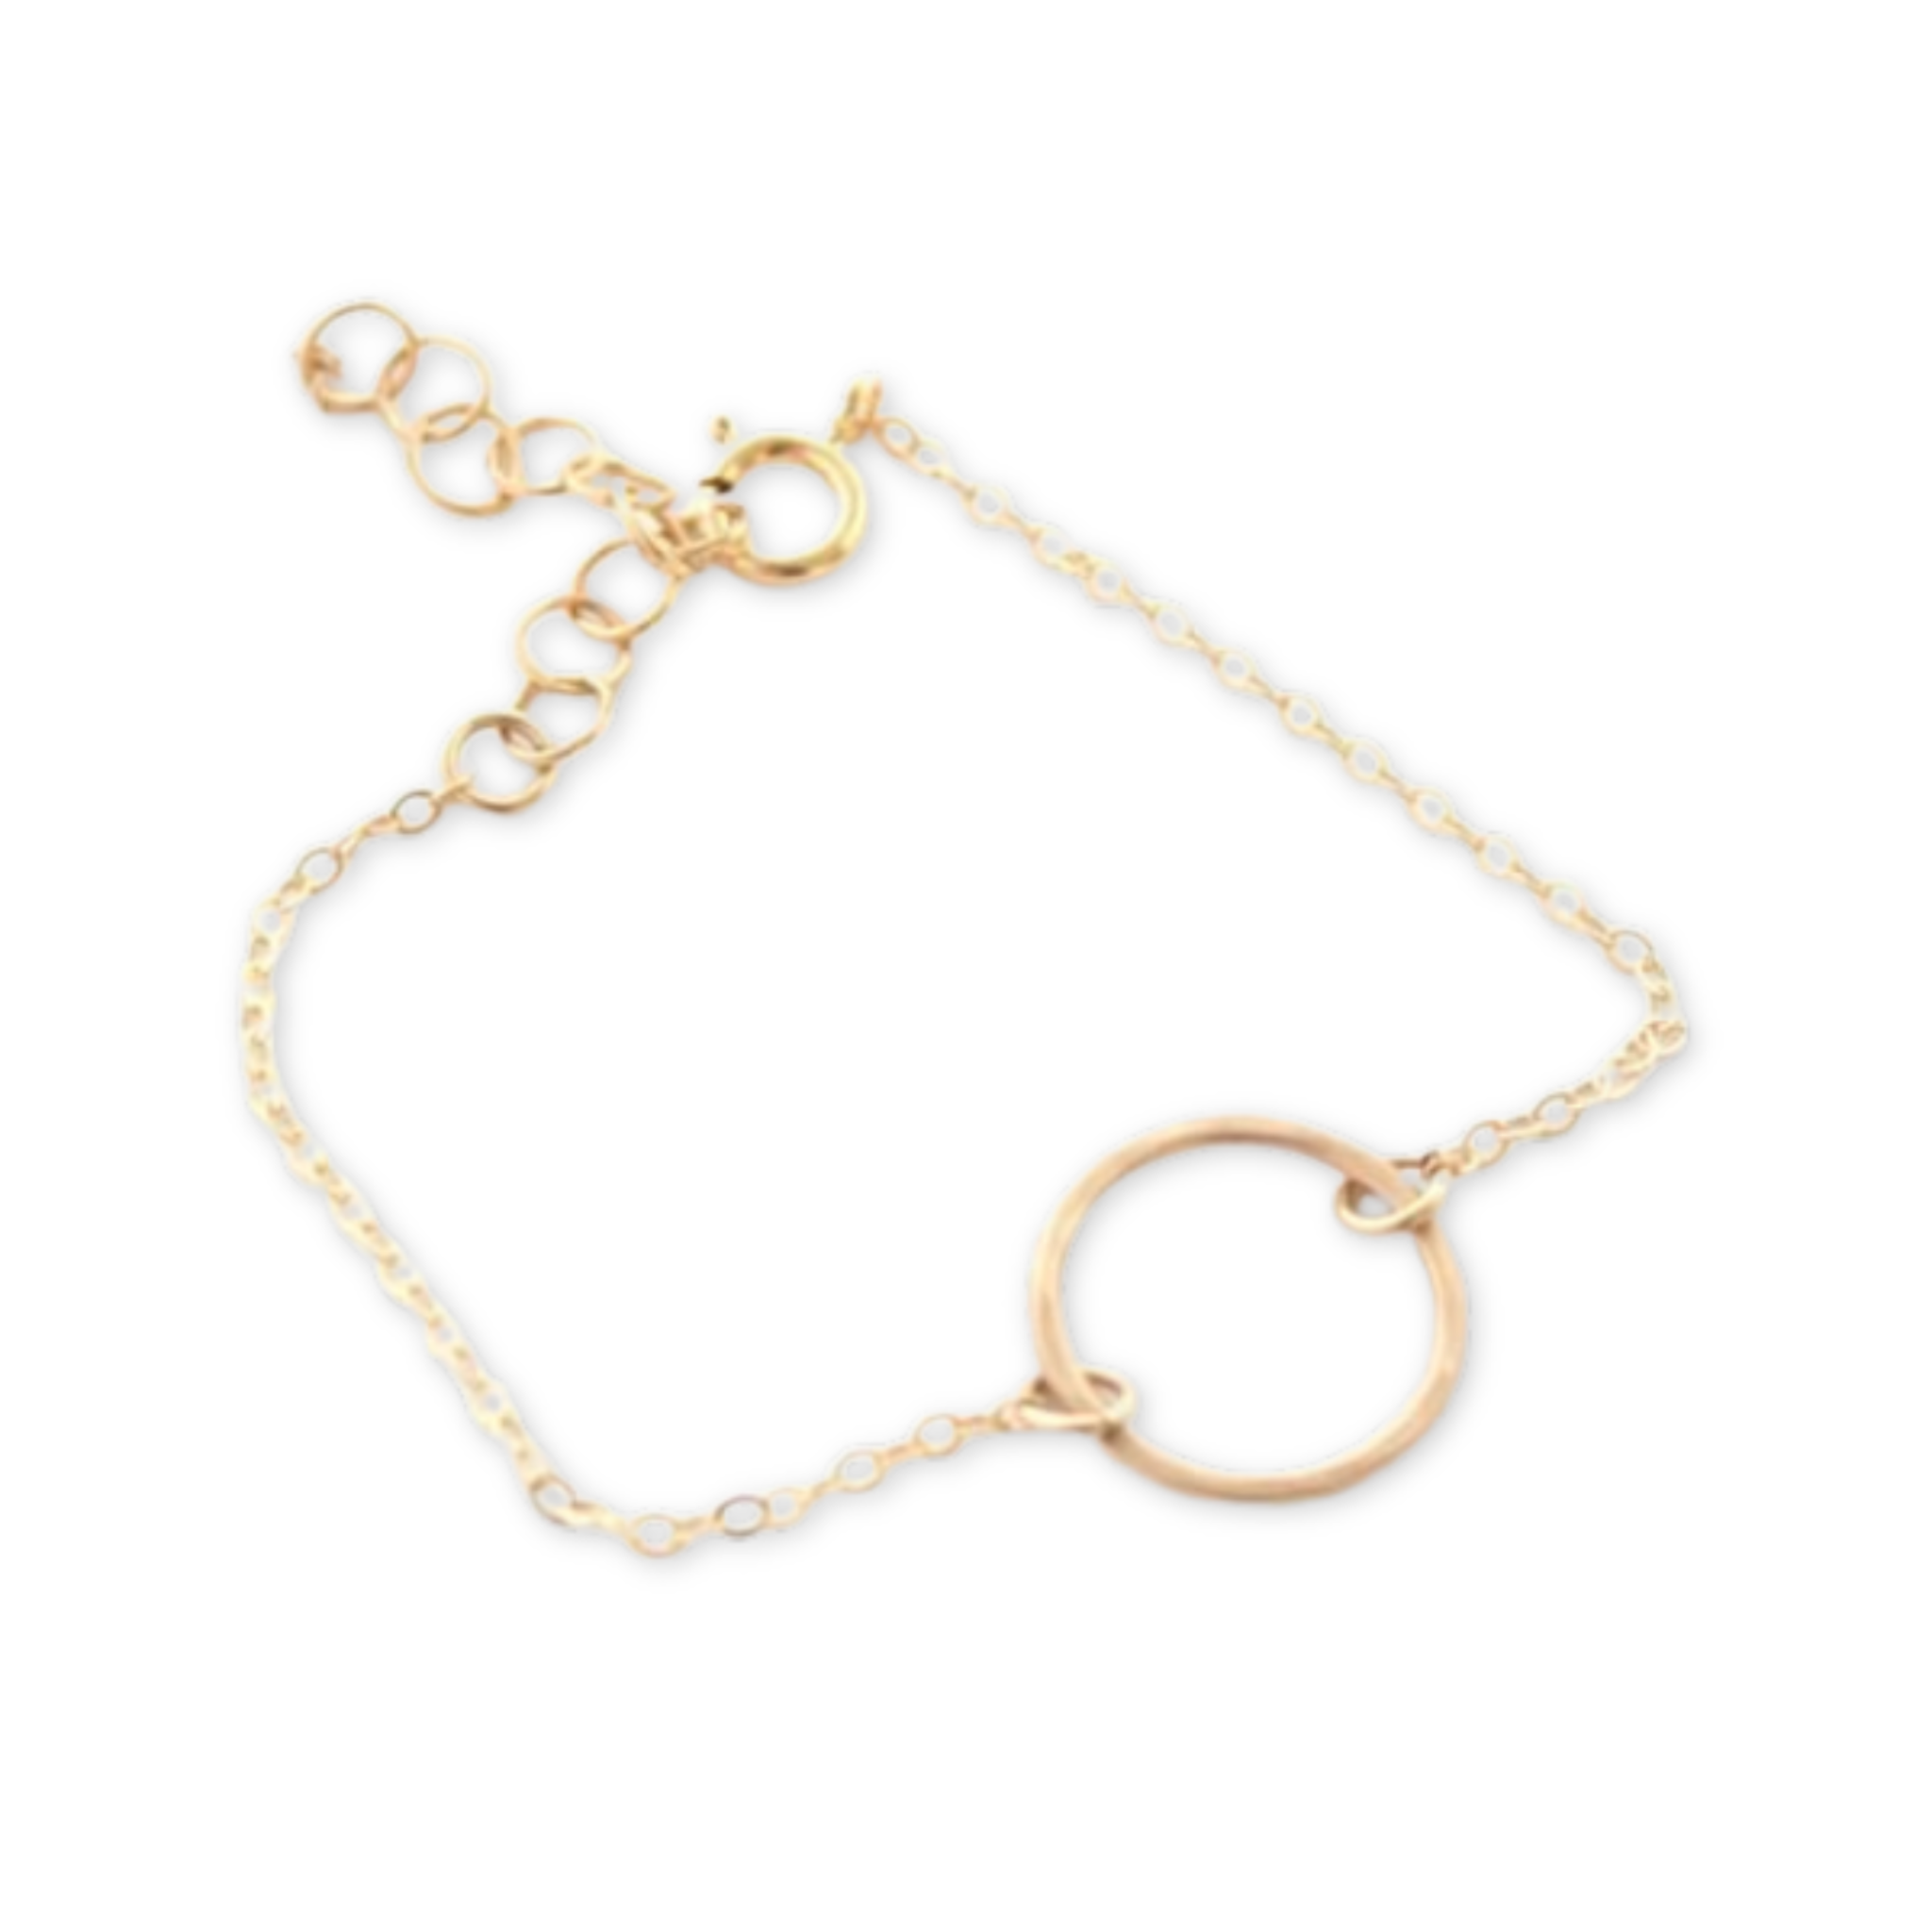 delicate adjustable chain bracelet with a simple round hammered circle pendant